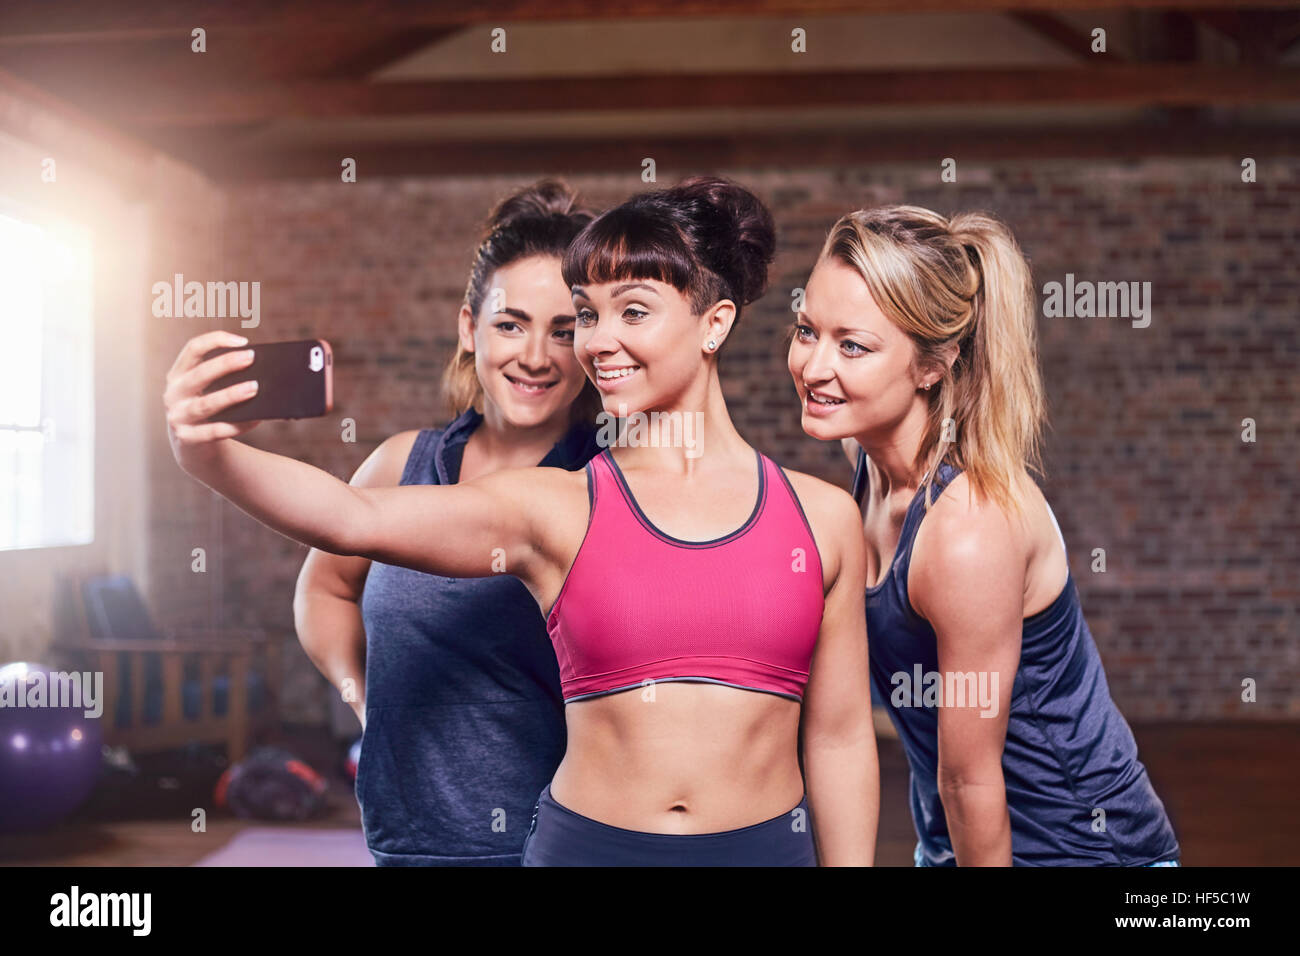 Fit young women in sports clothing taking selfie with camera phone in gym studio Stock Photo